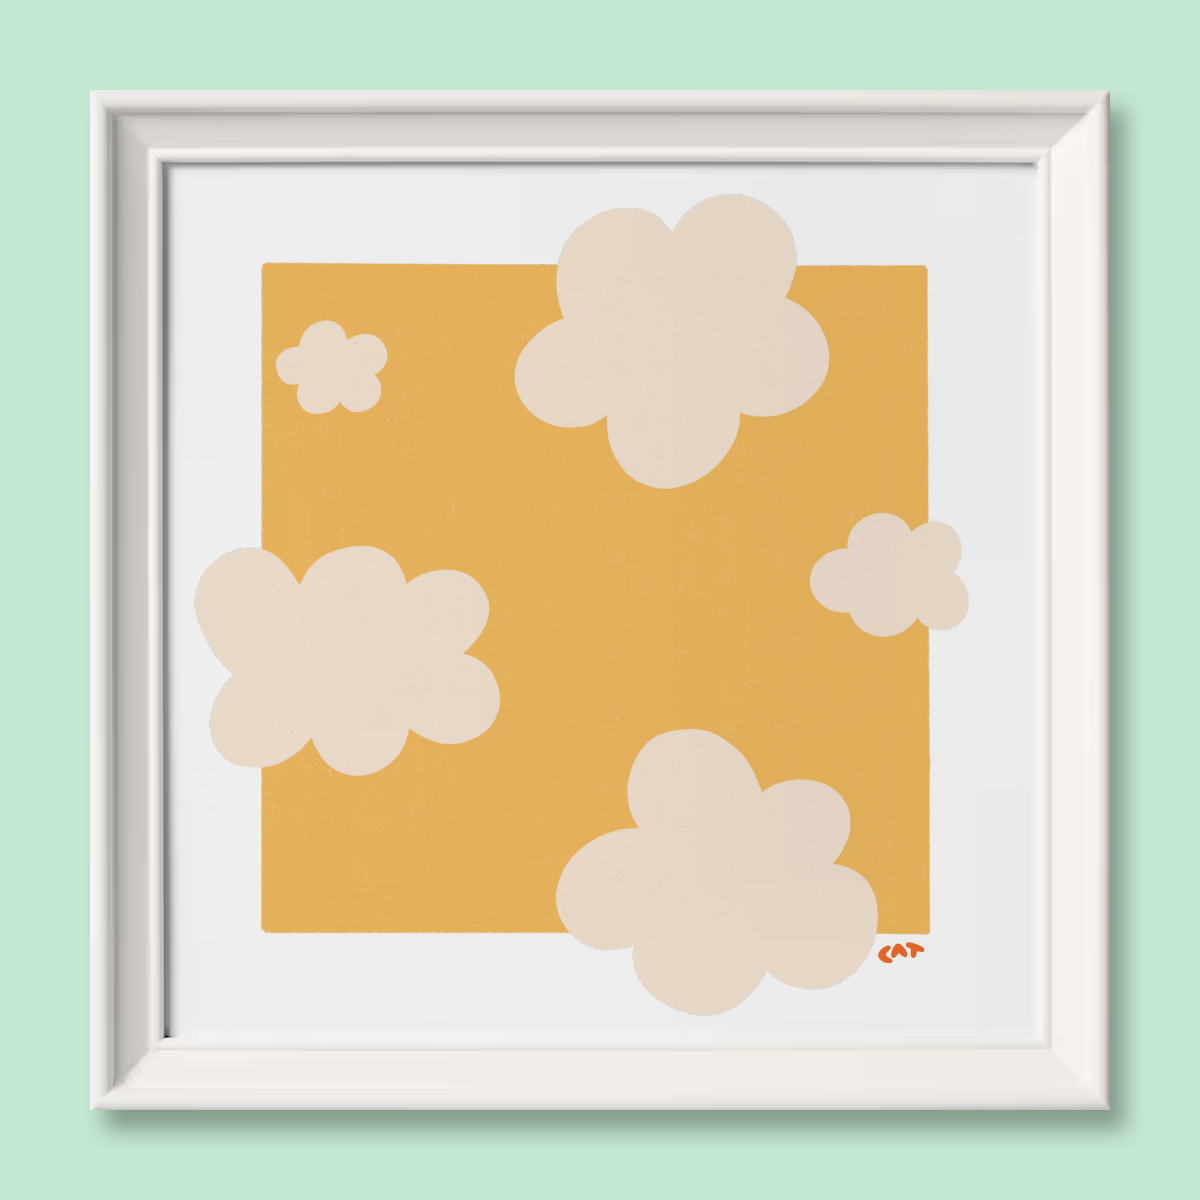 Framed print of a yellow rectangle with beige fluffy shapes.